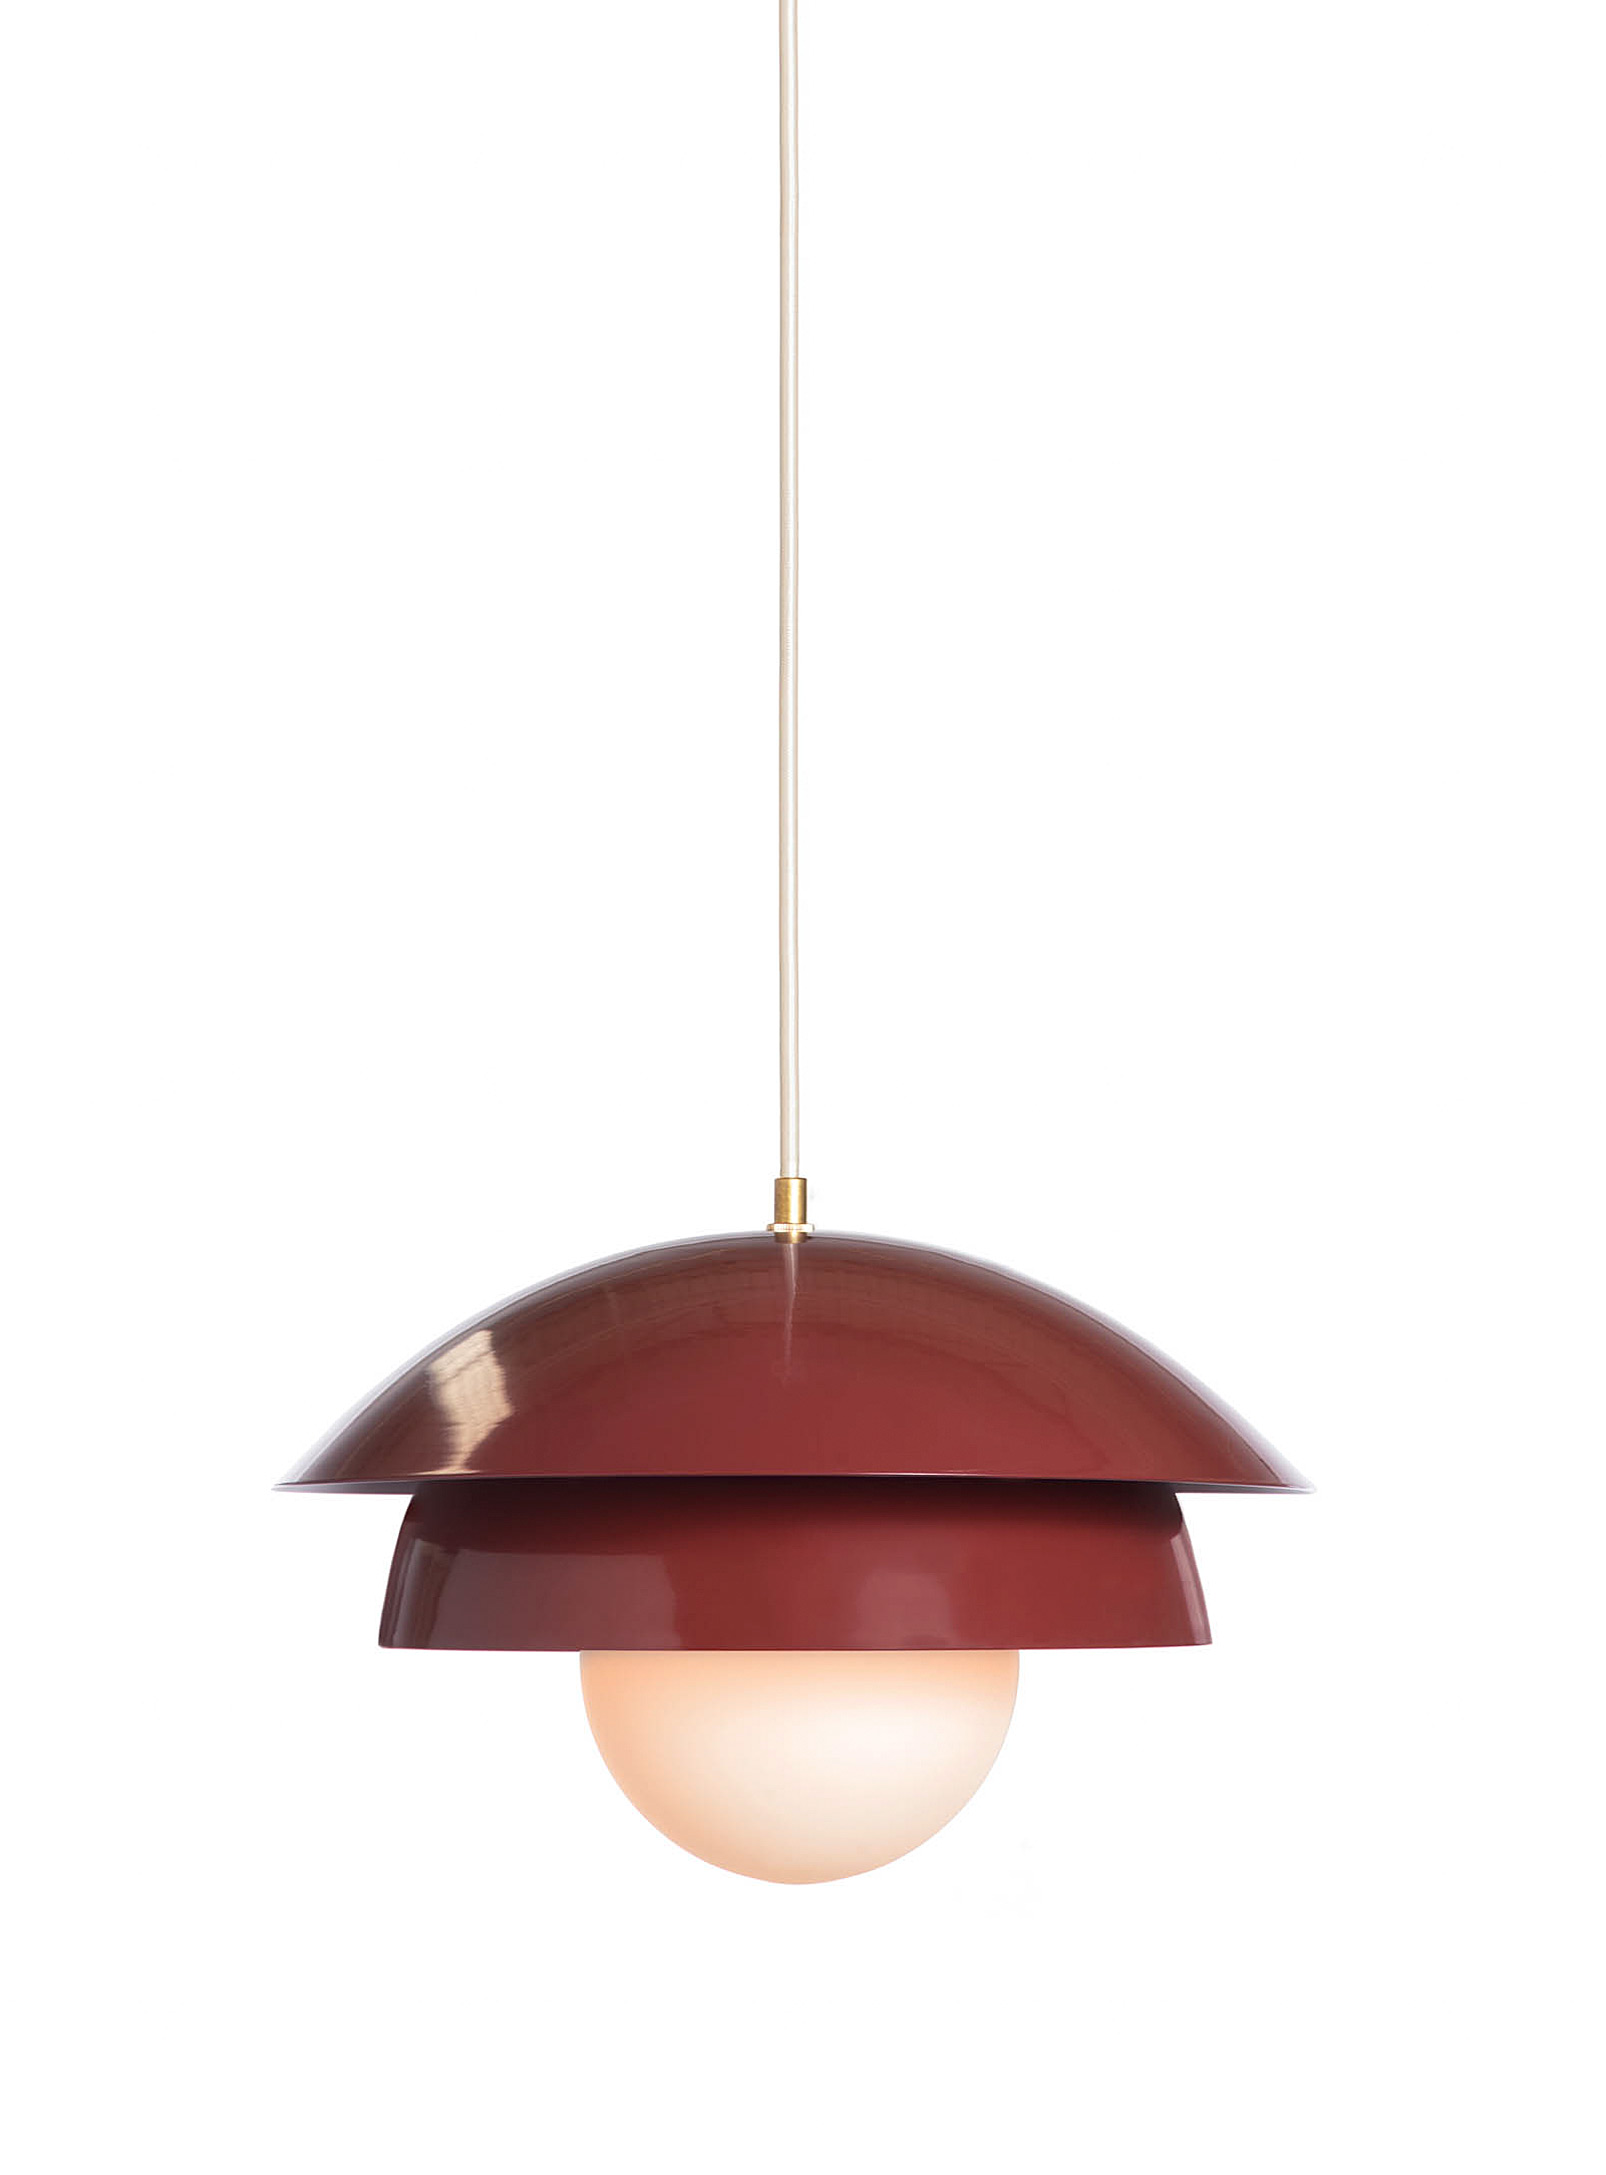 Luminaire Authentik Large Finlandaise Hanging Lamp In Ruby Red